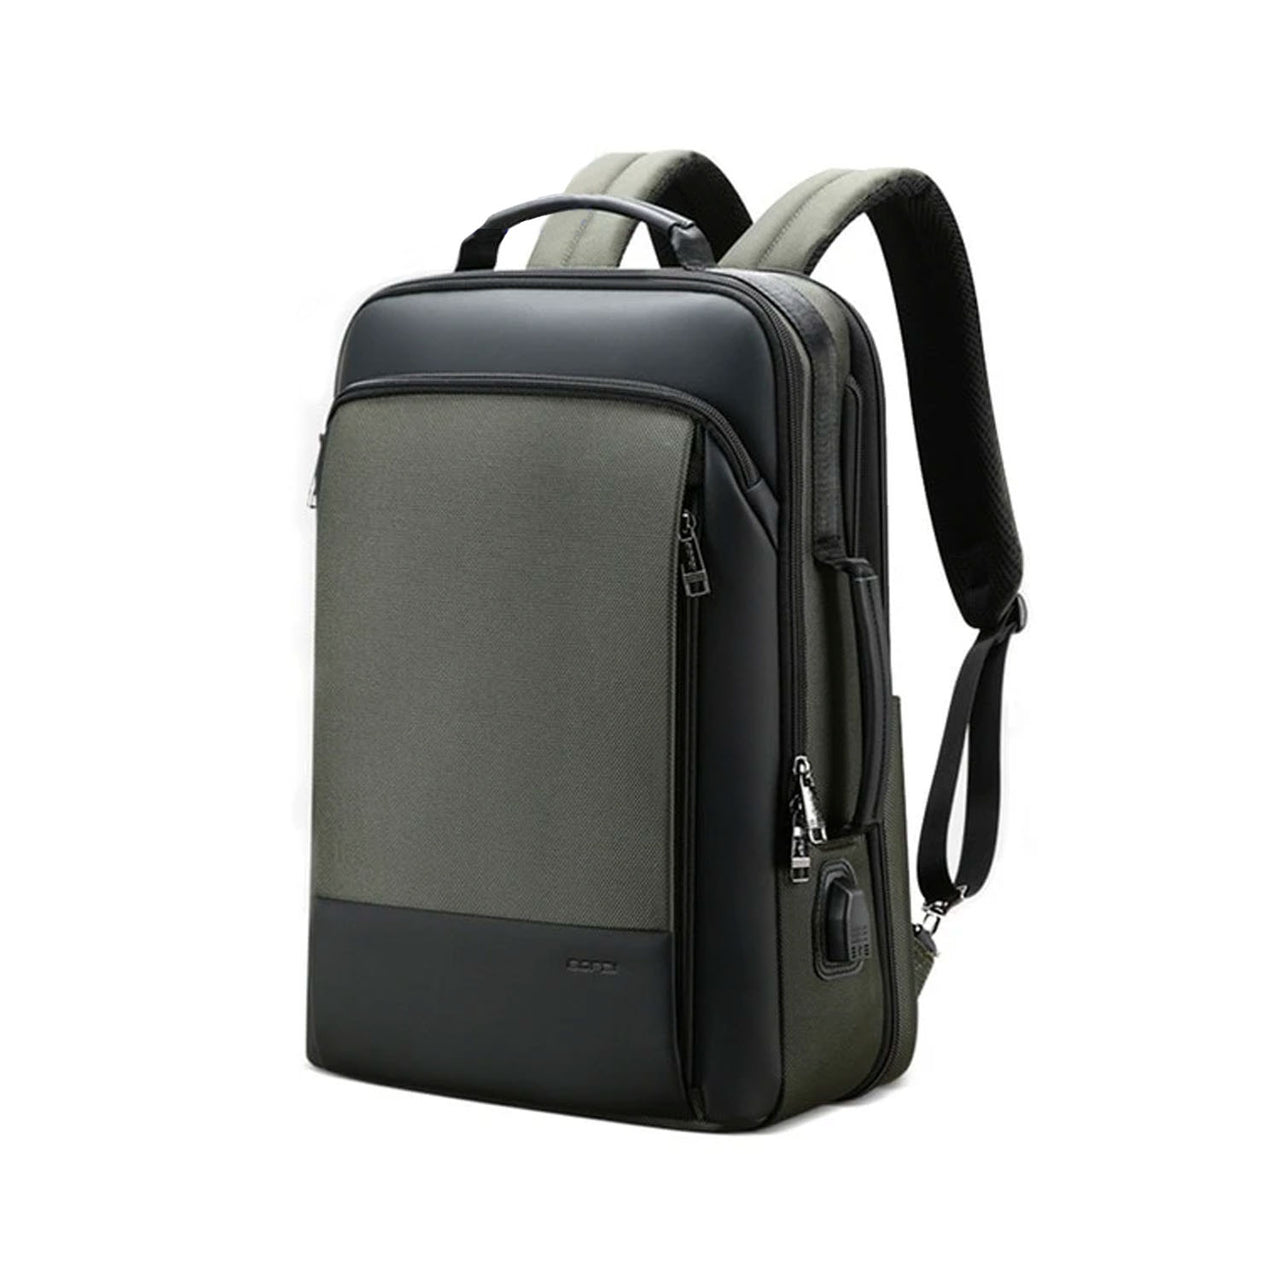 Laptop Backpack for Work or Travel